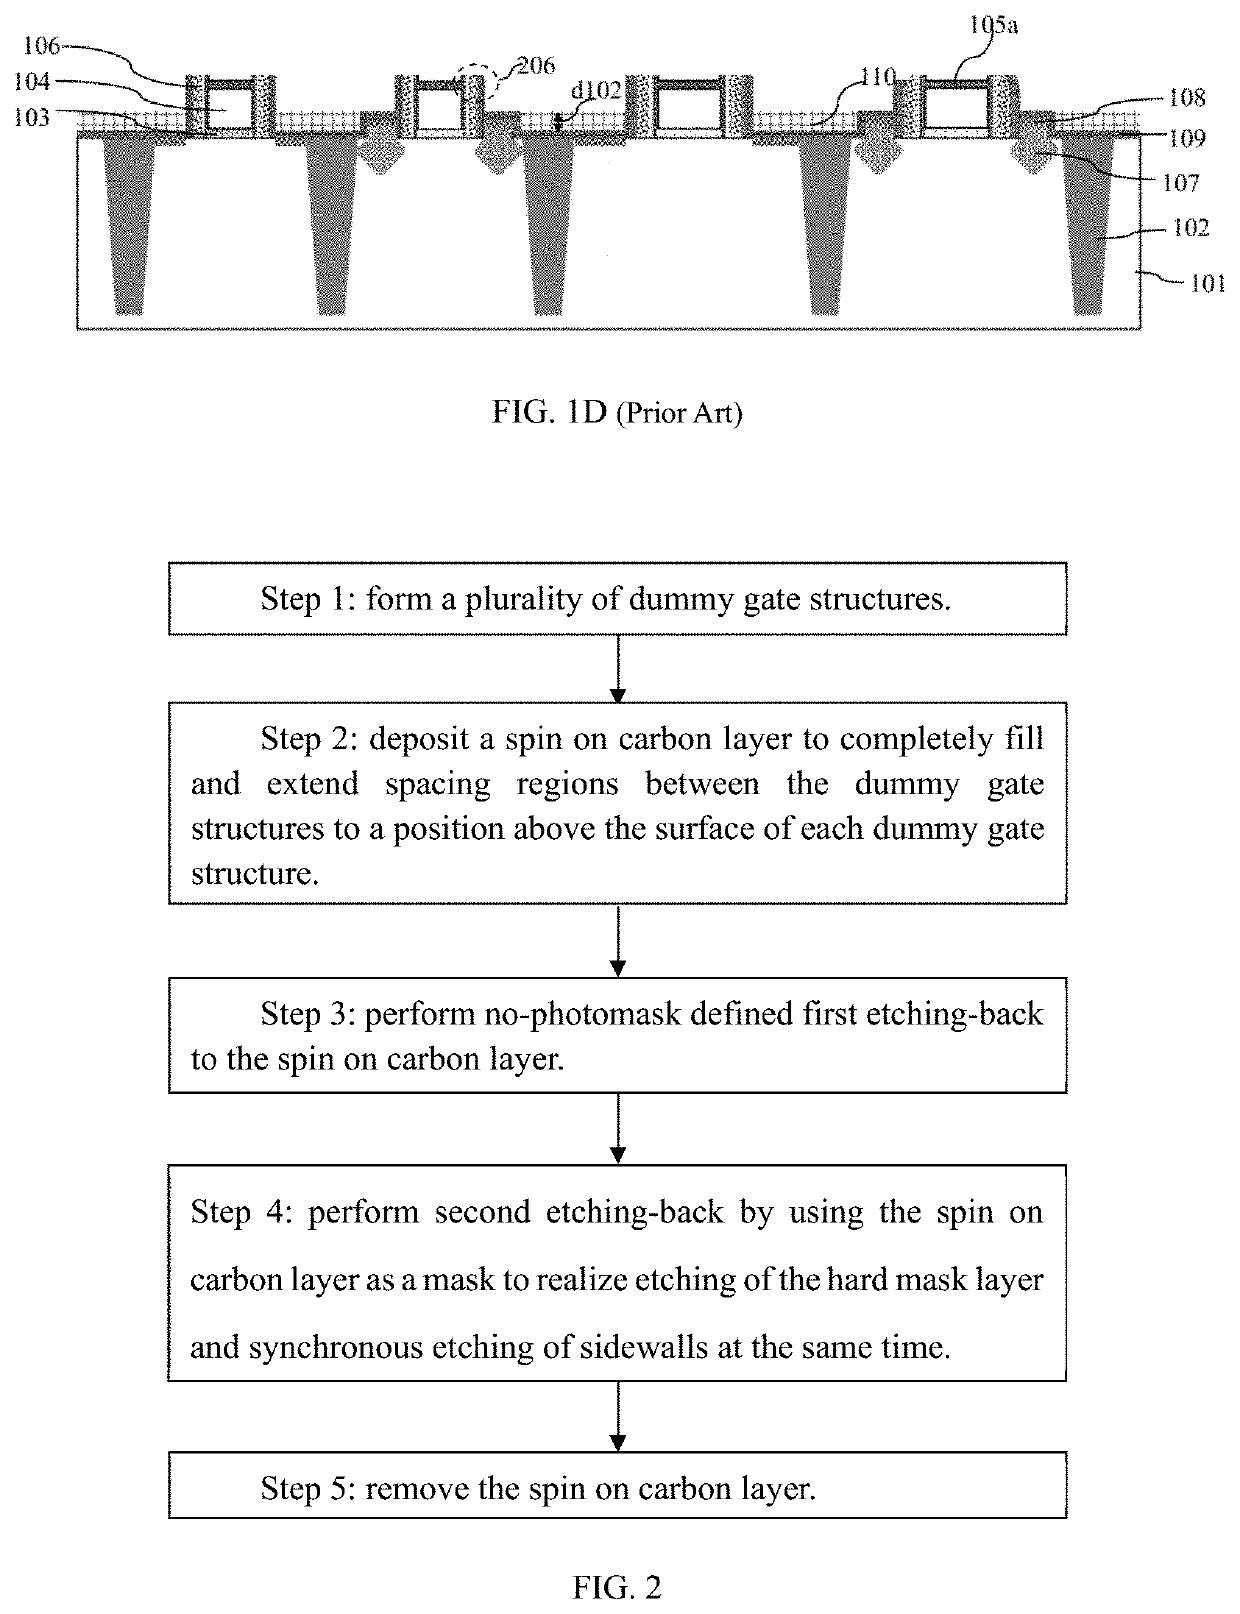 Method for etching back hard mask layer on tops of dummy polysilicon gates in gate last process